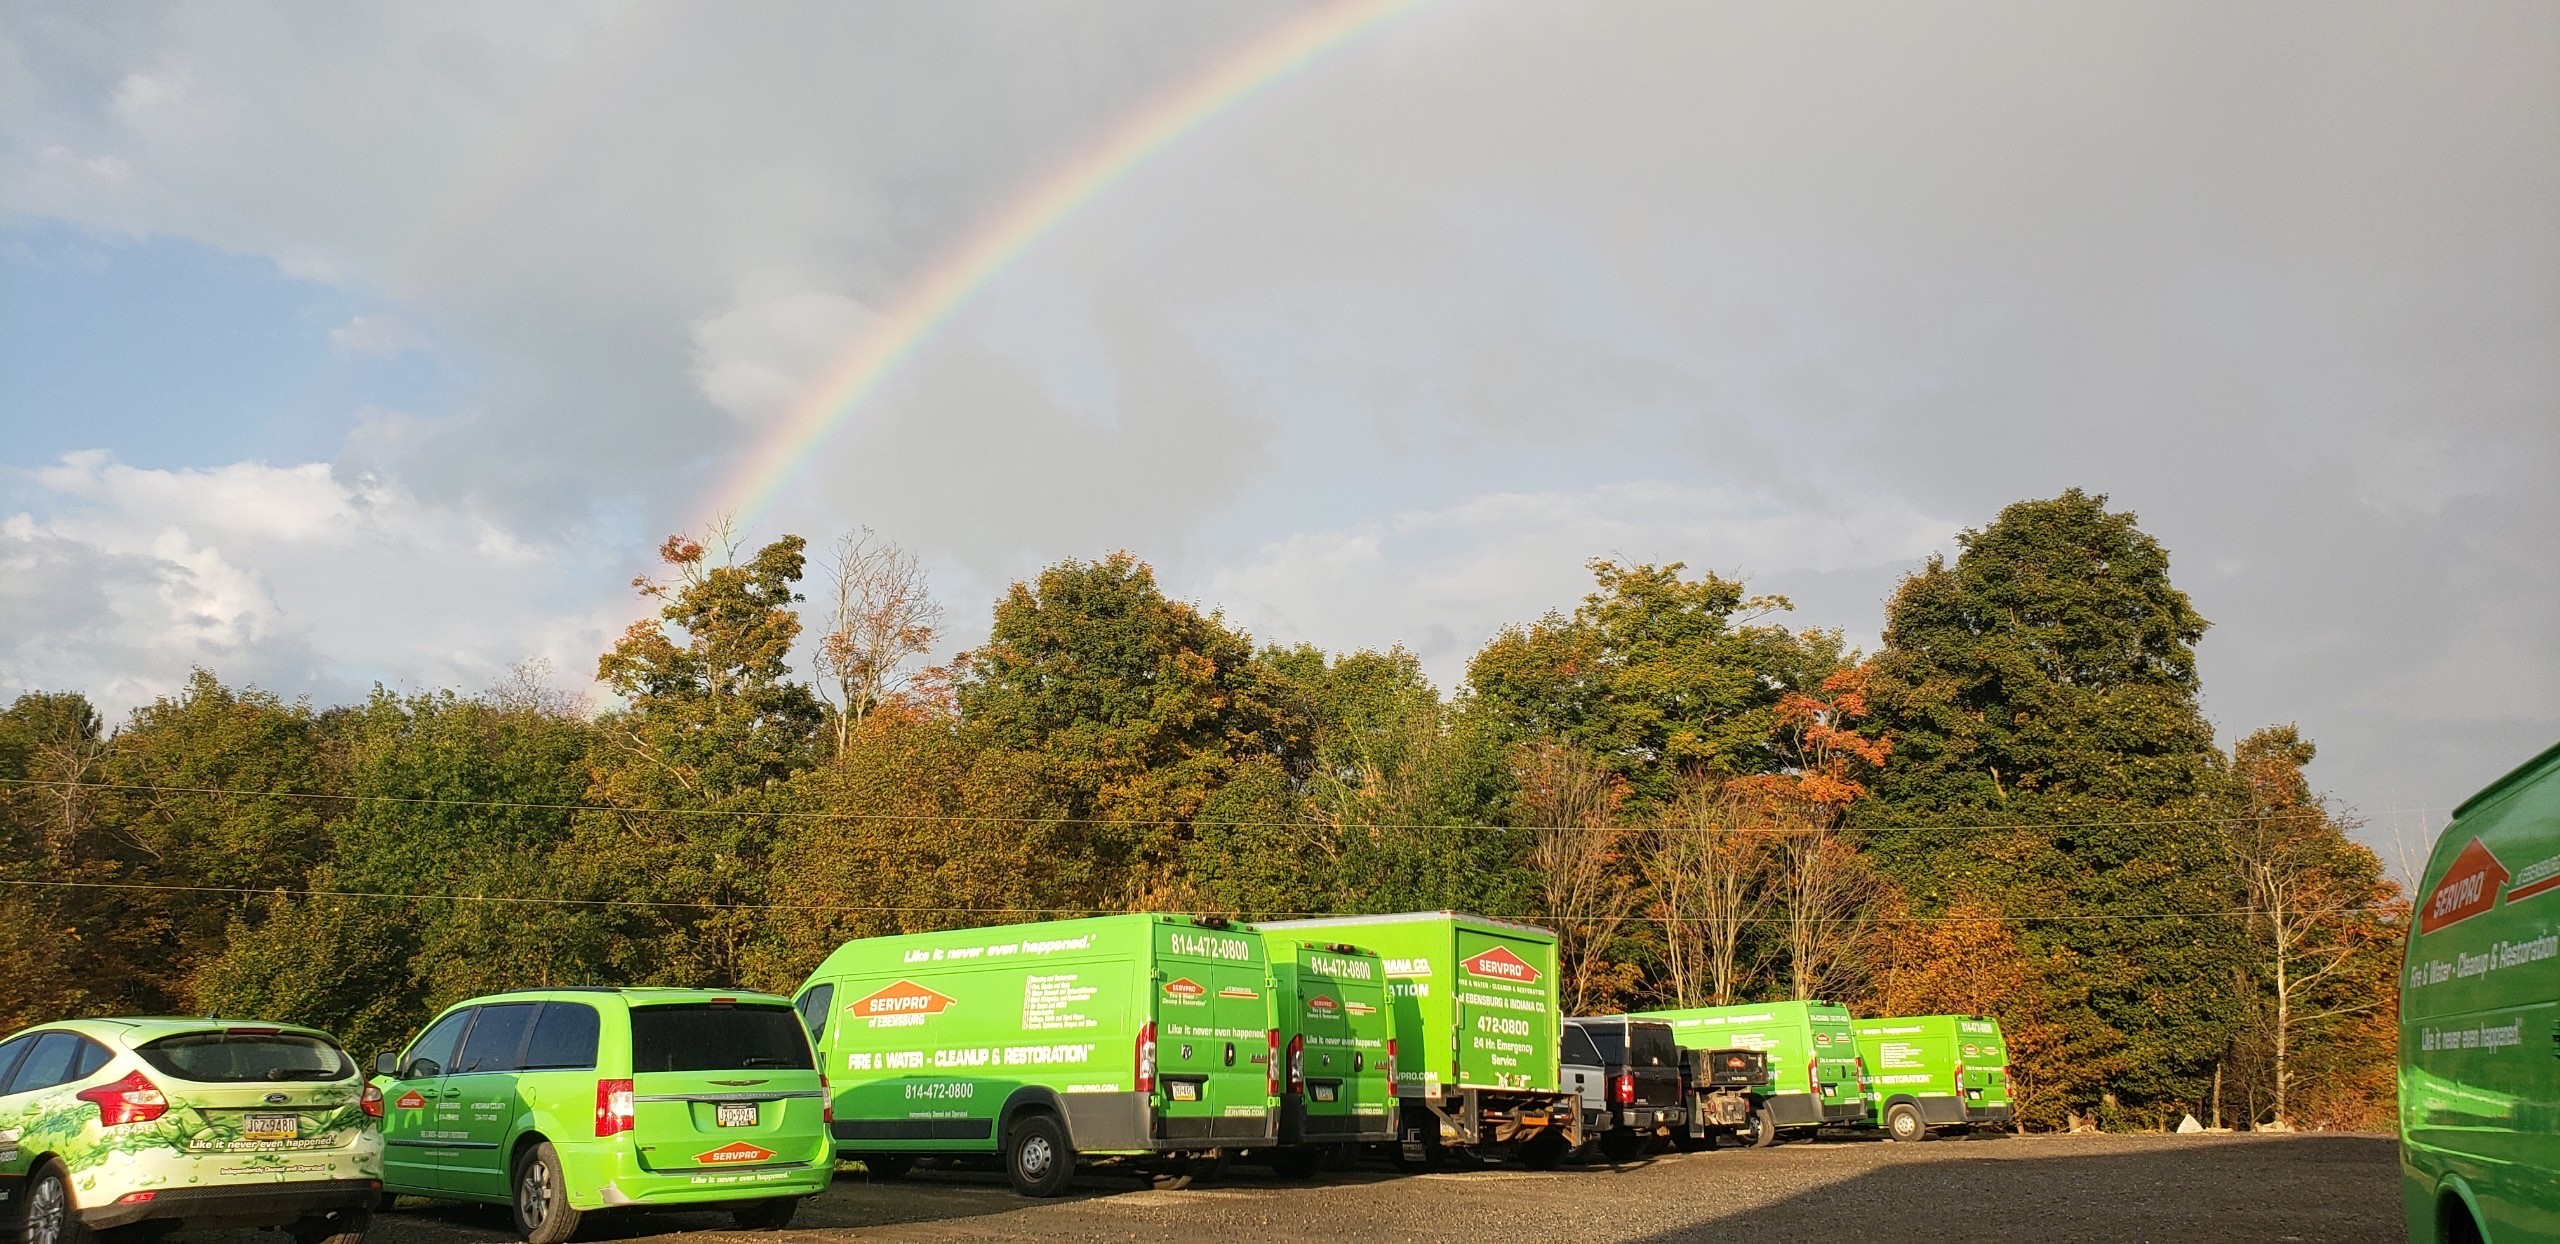 When SERVPRO of Ebensburg arrives, we do it in style! Call us for all your restoration needs!